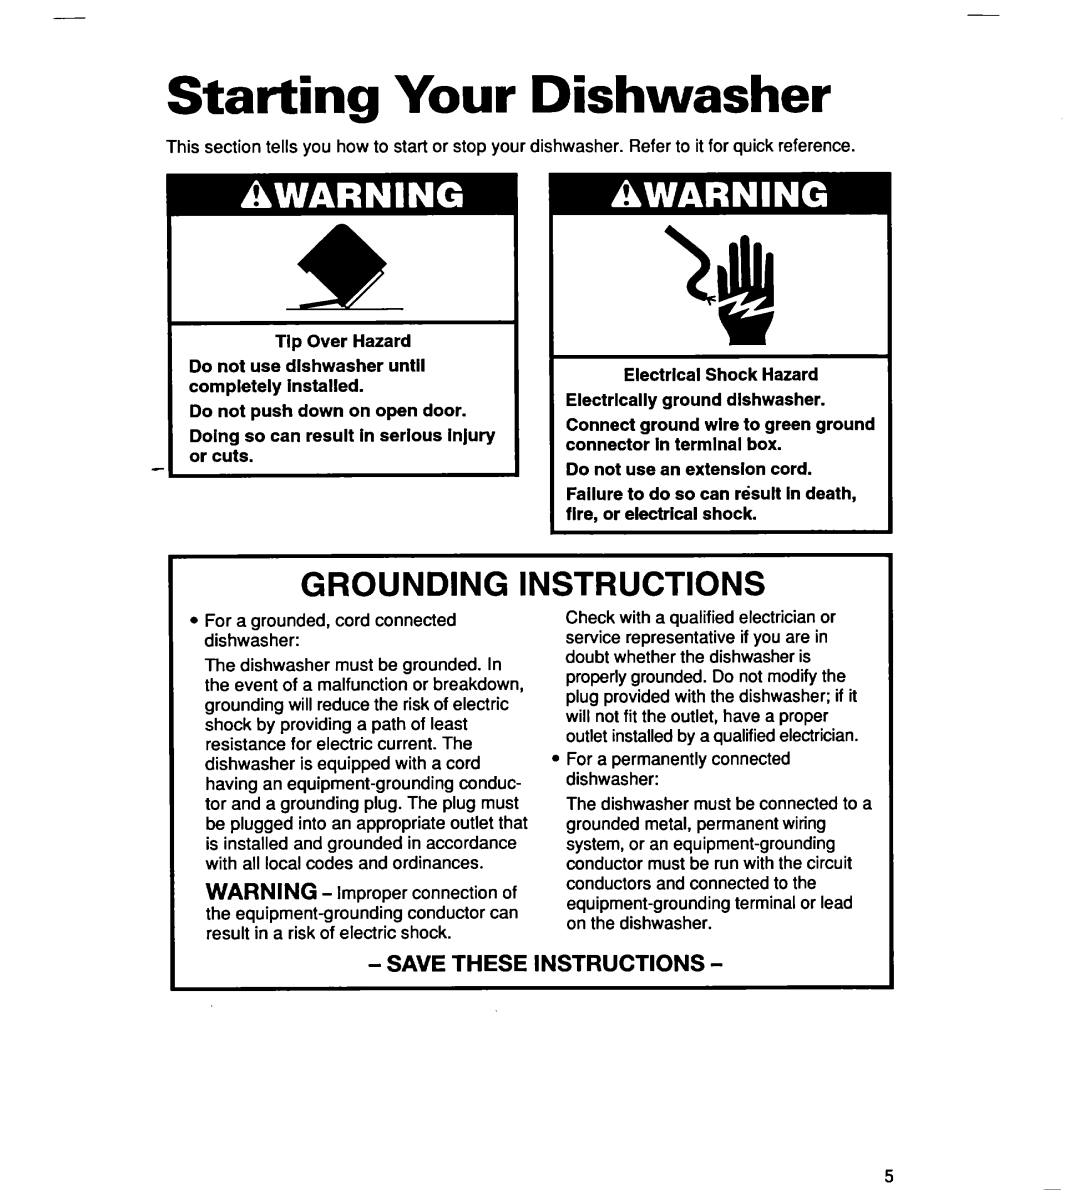 Whirlpool SERIES 940 warranty Starting Your Dishwasher, Grounding, Save These Instructions 